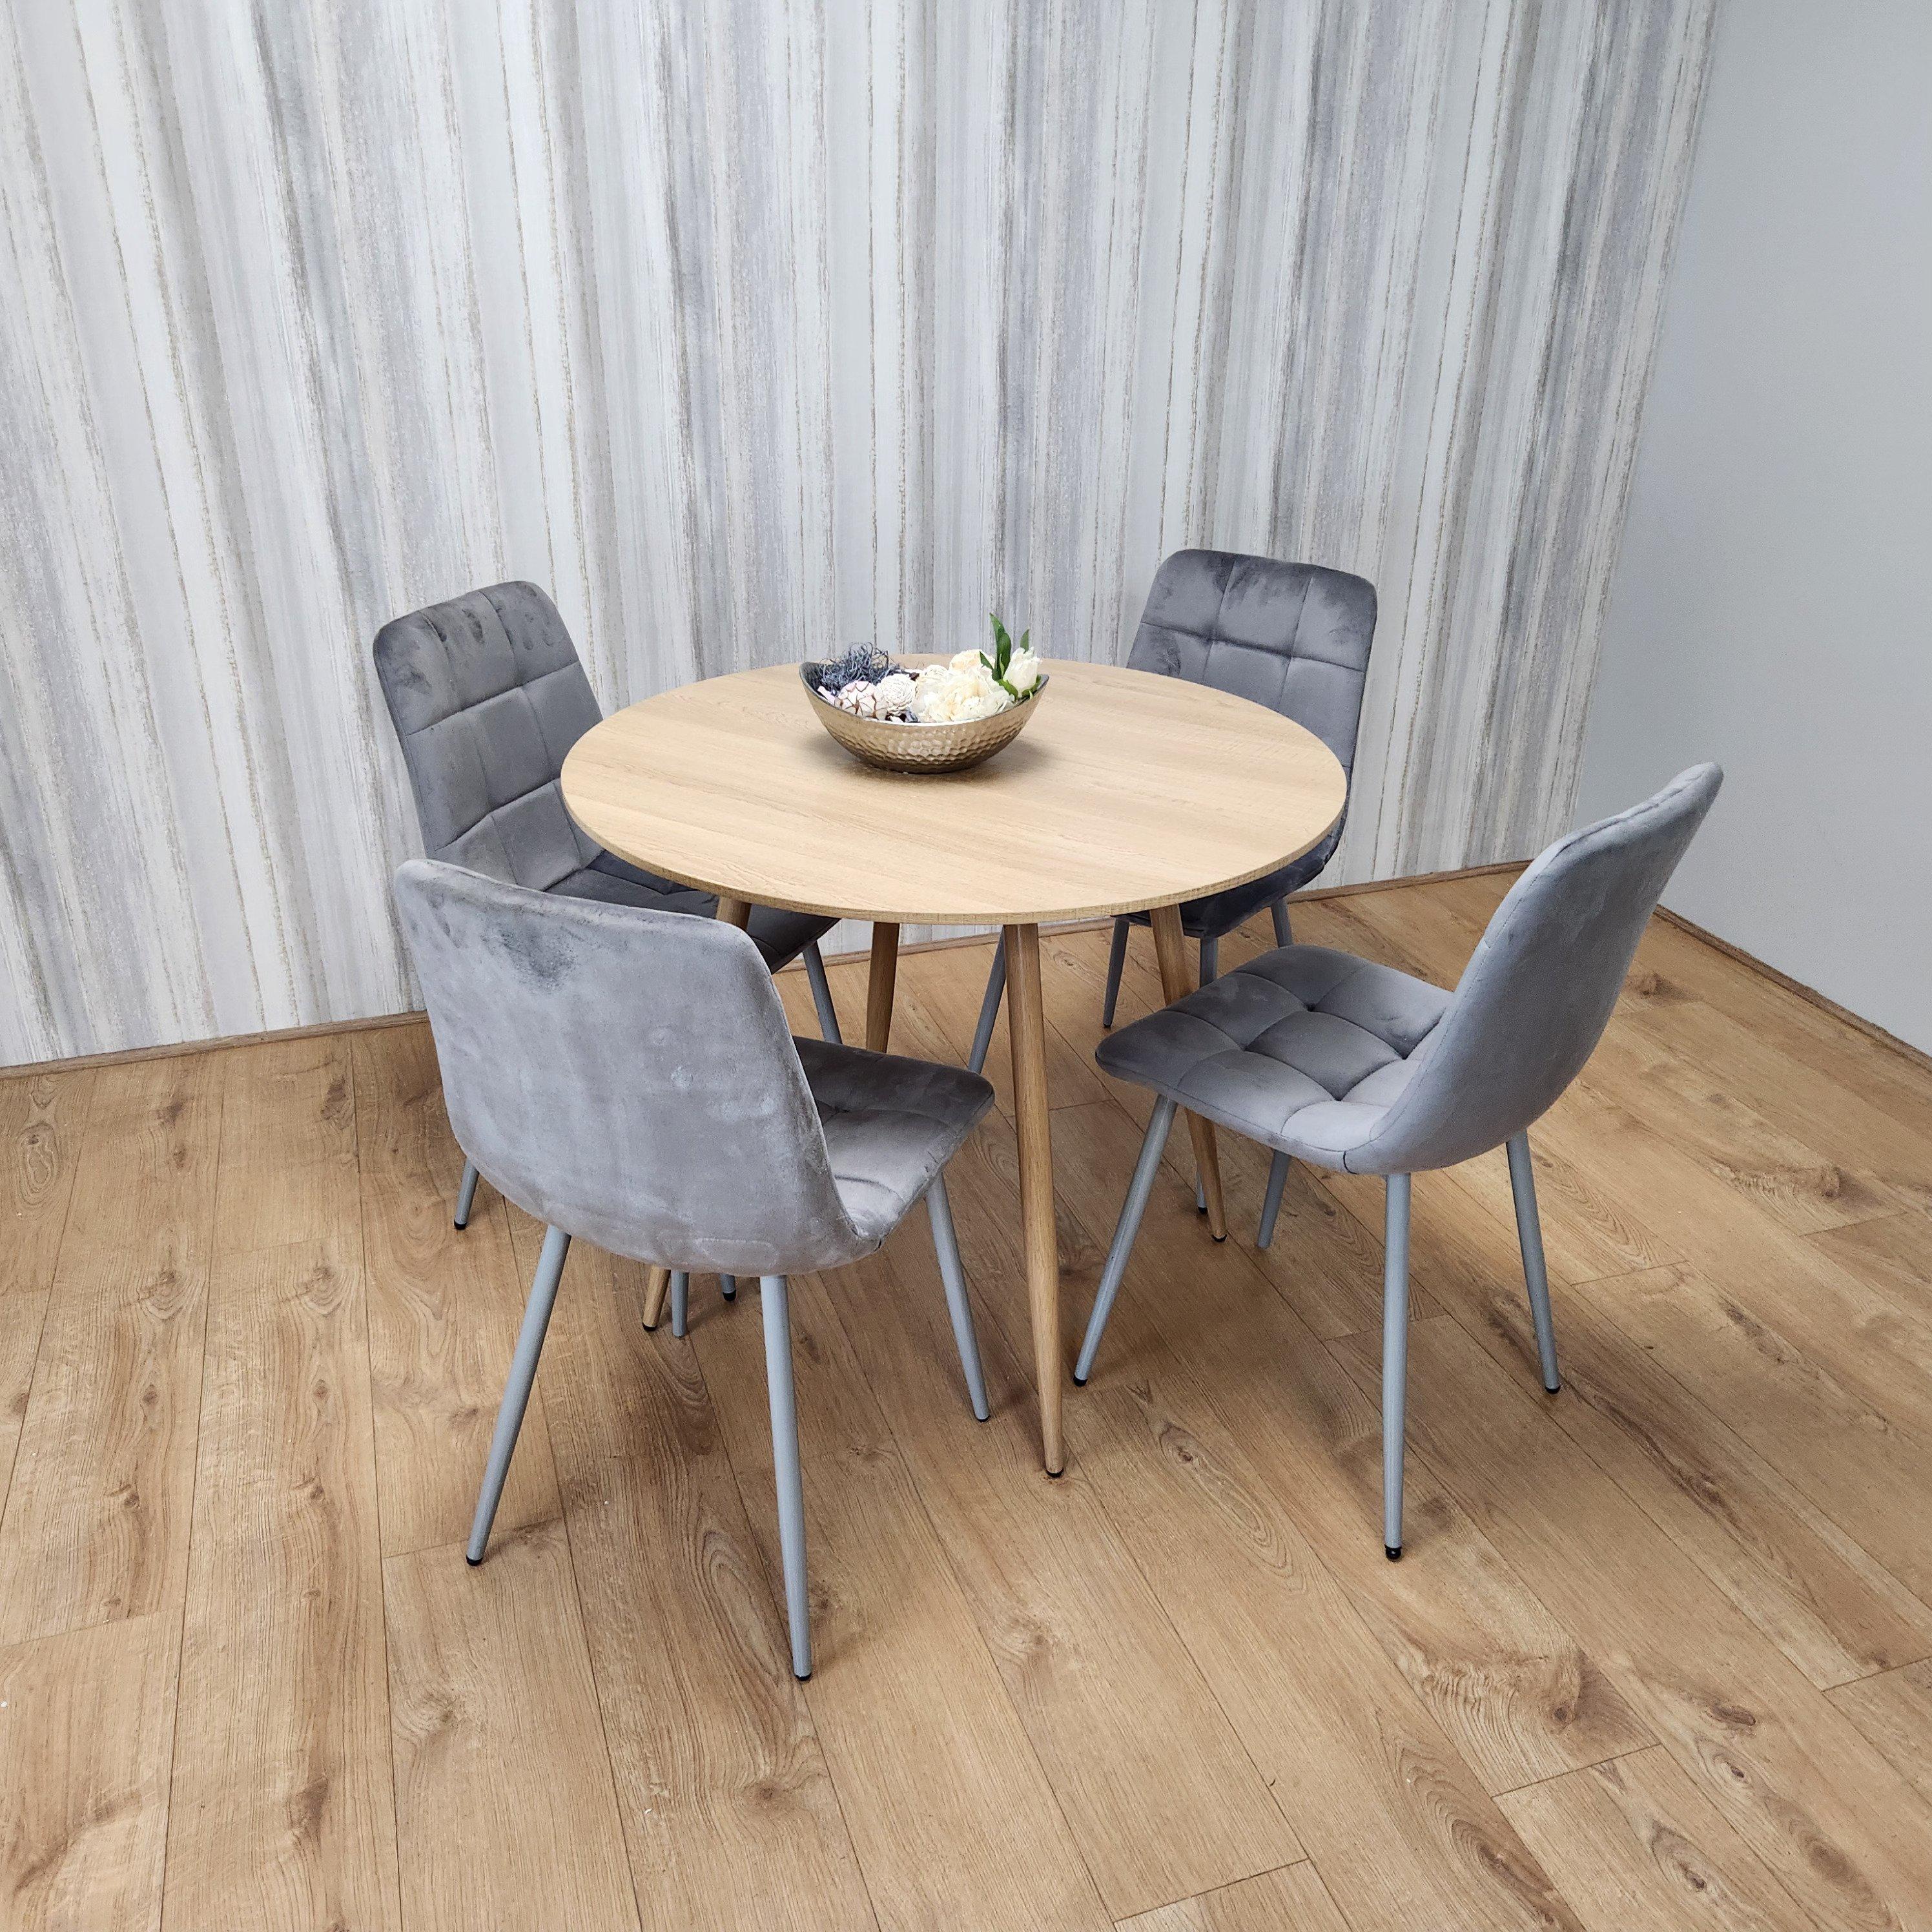 Round Oak Effect Kitchen Dining Table With 4 Grey Velvet Tufted Chairs Dining Set